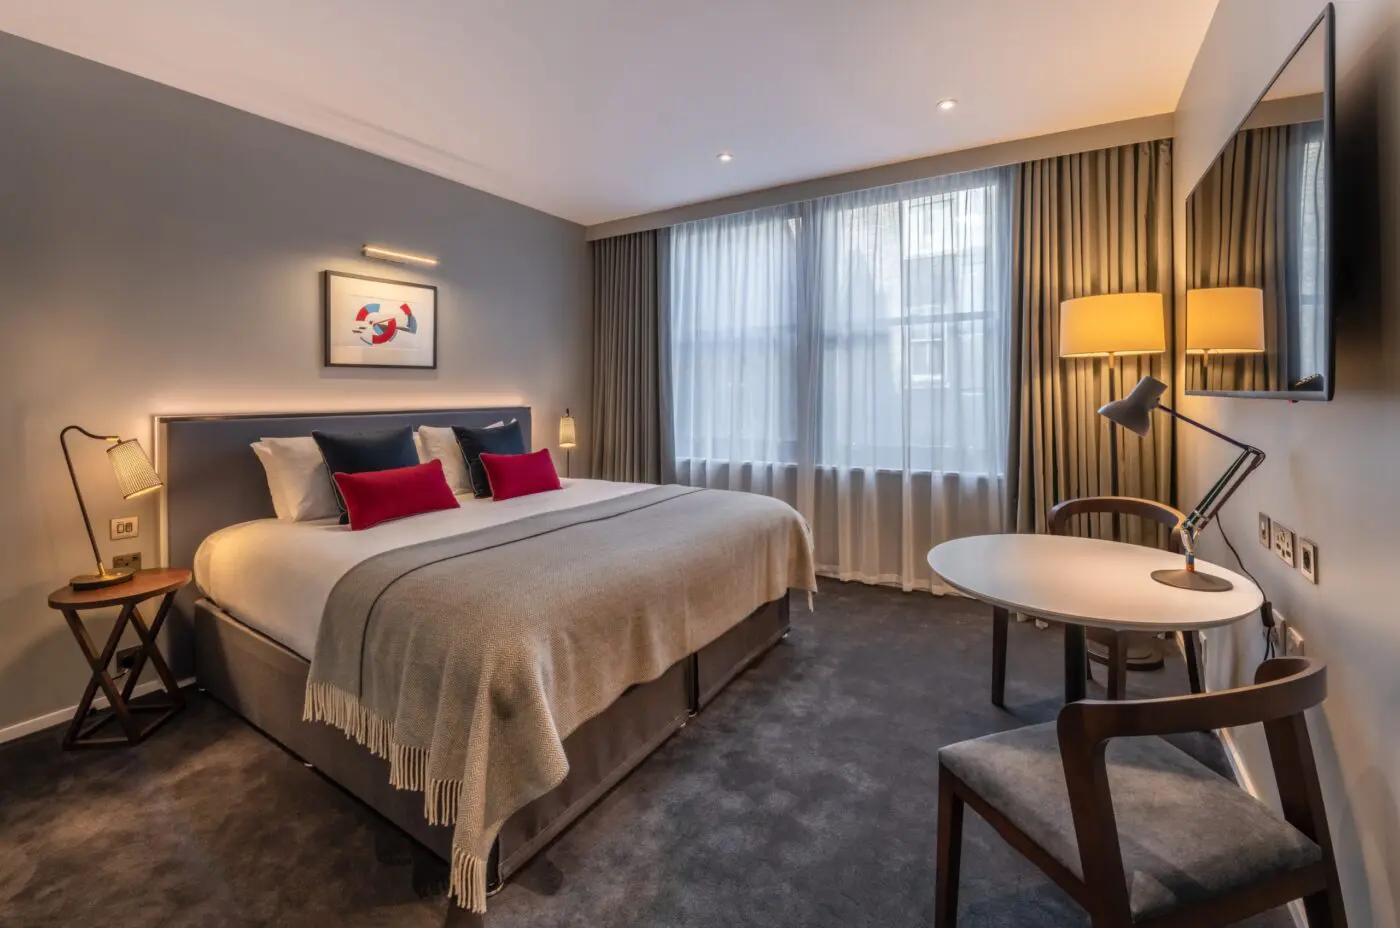 A superior room with a double bed, dining table and television, located in Covent Garden.